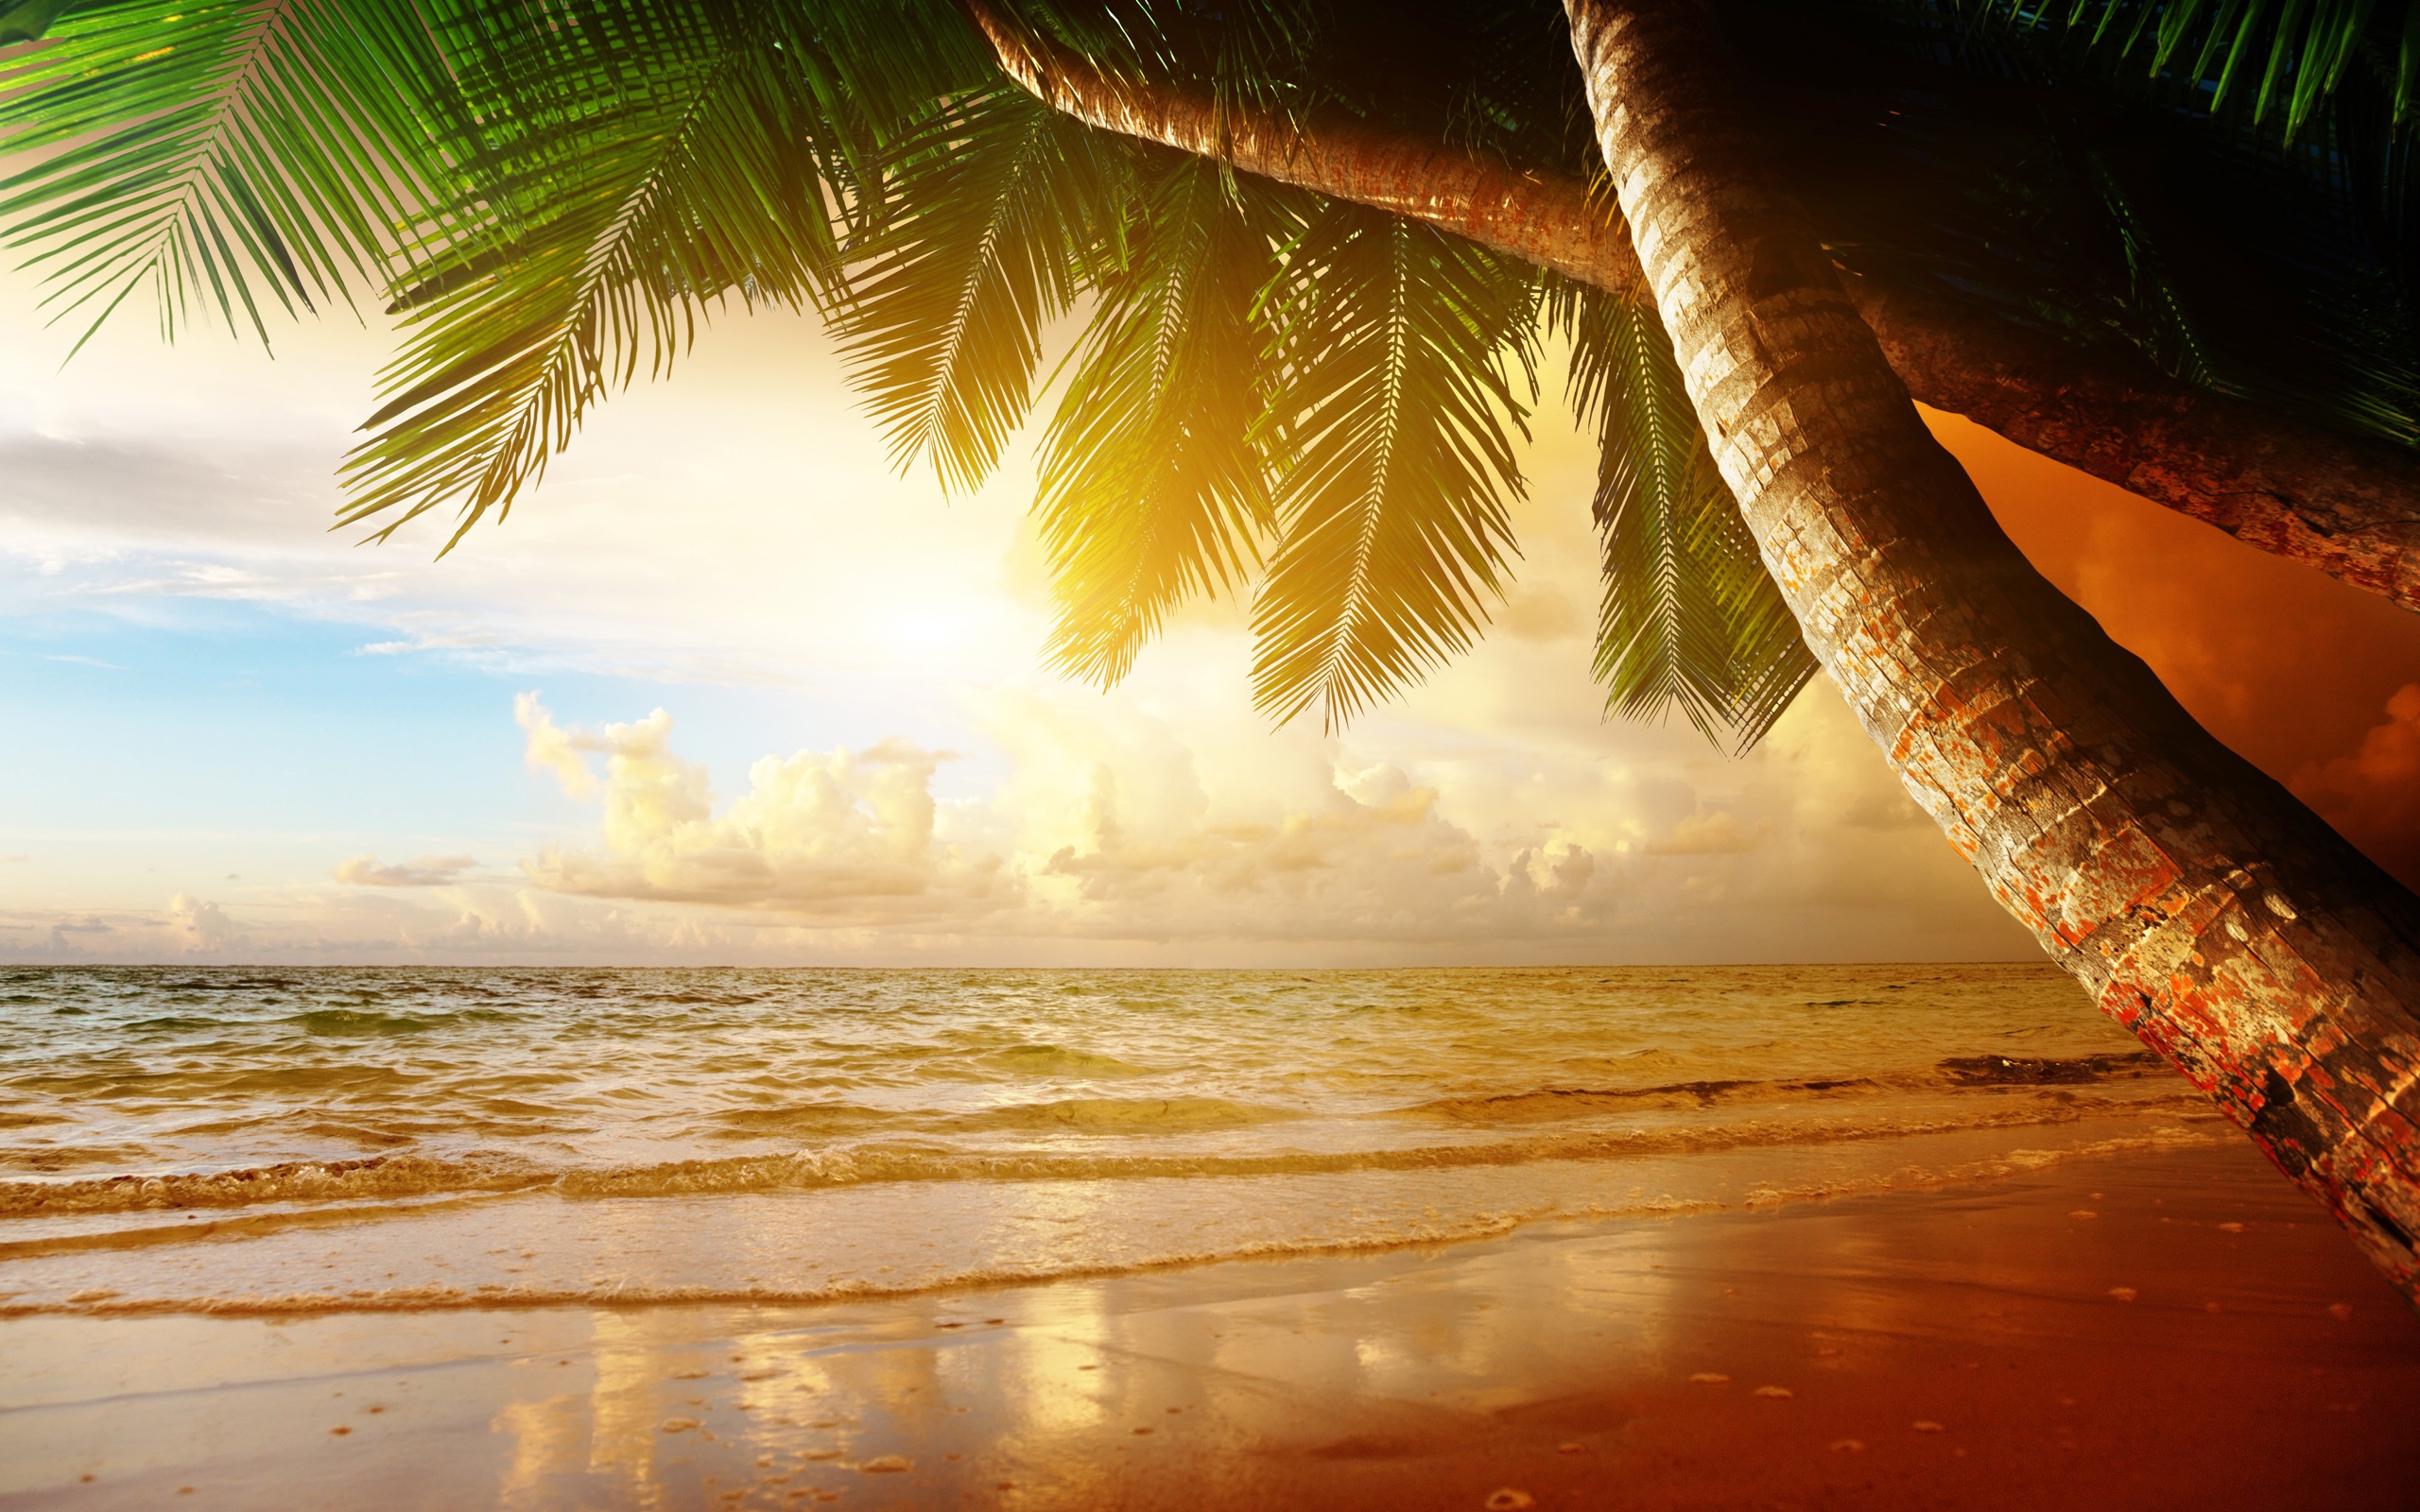 Summer tropical scenery, sunset, sea, ocean, palm trees, sunset